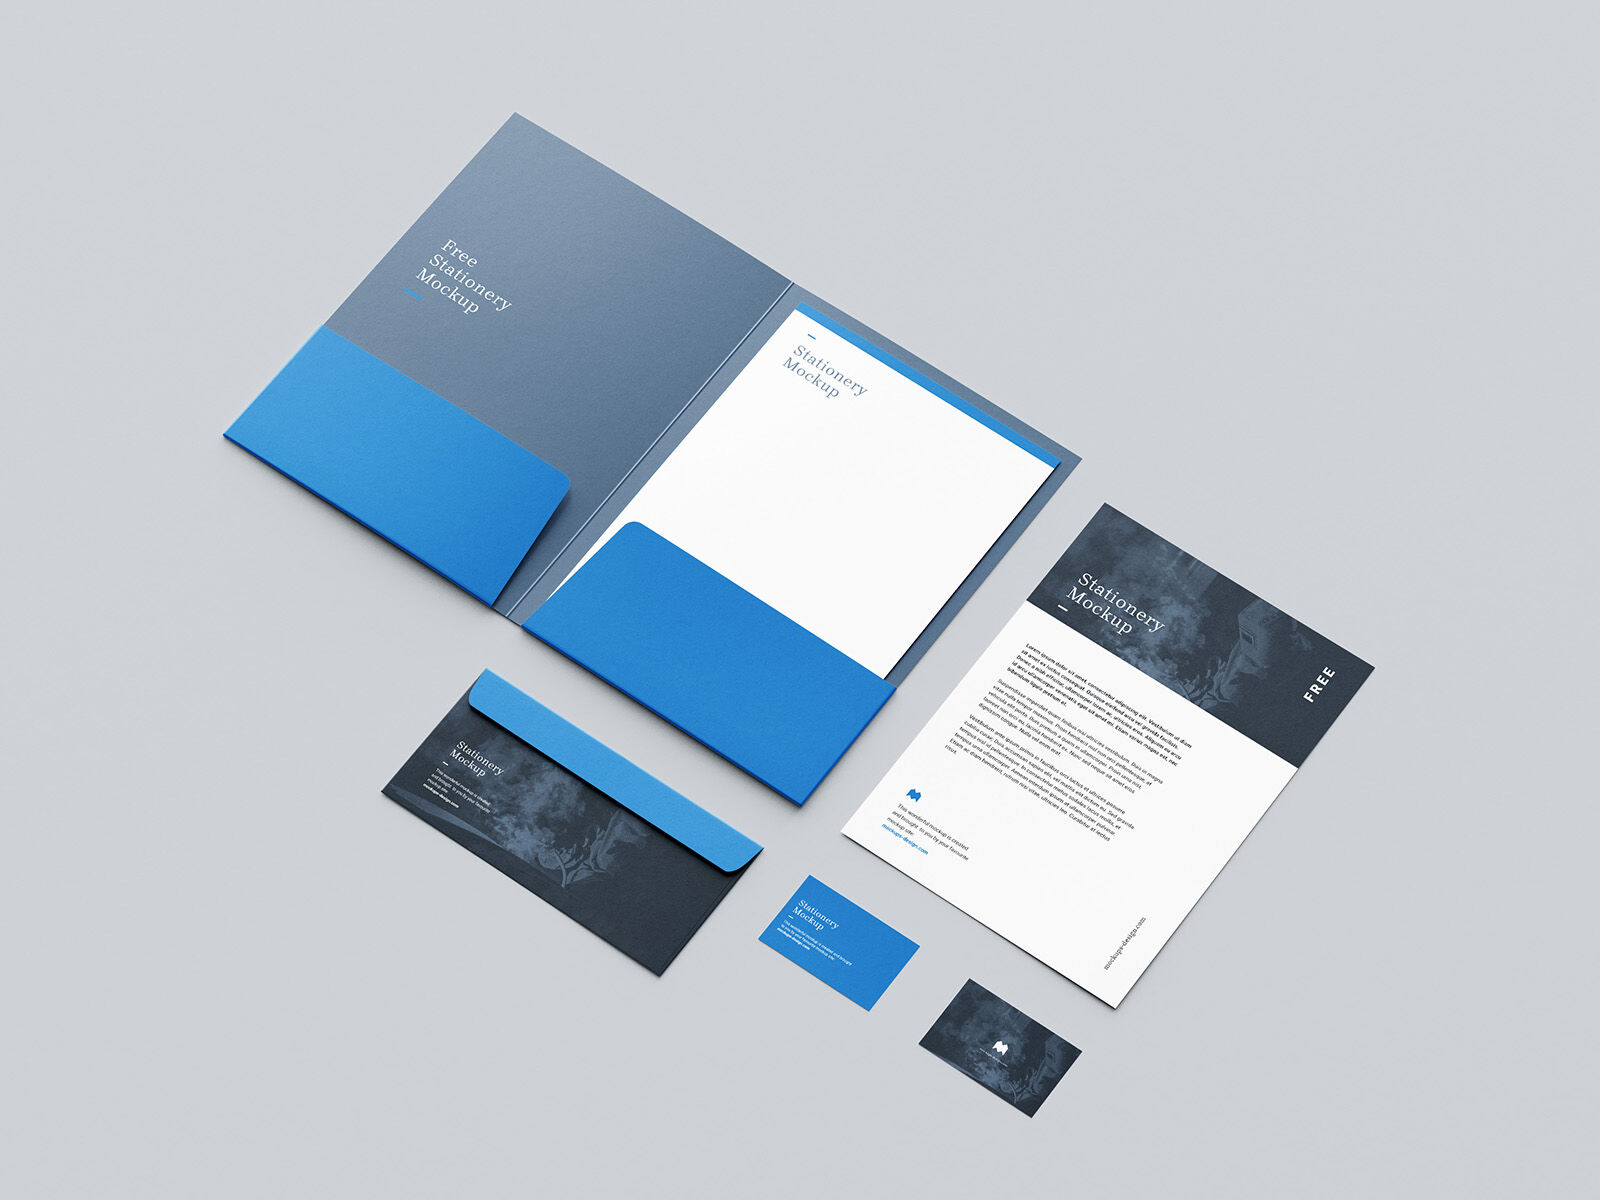 6 Mockups Featuring Stationery in Different Views FREE PSD